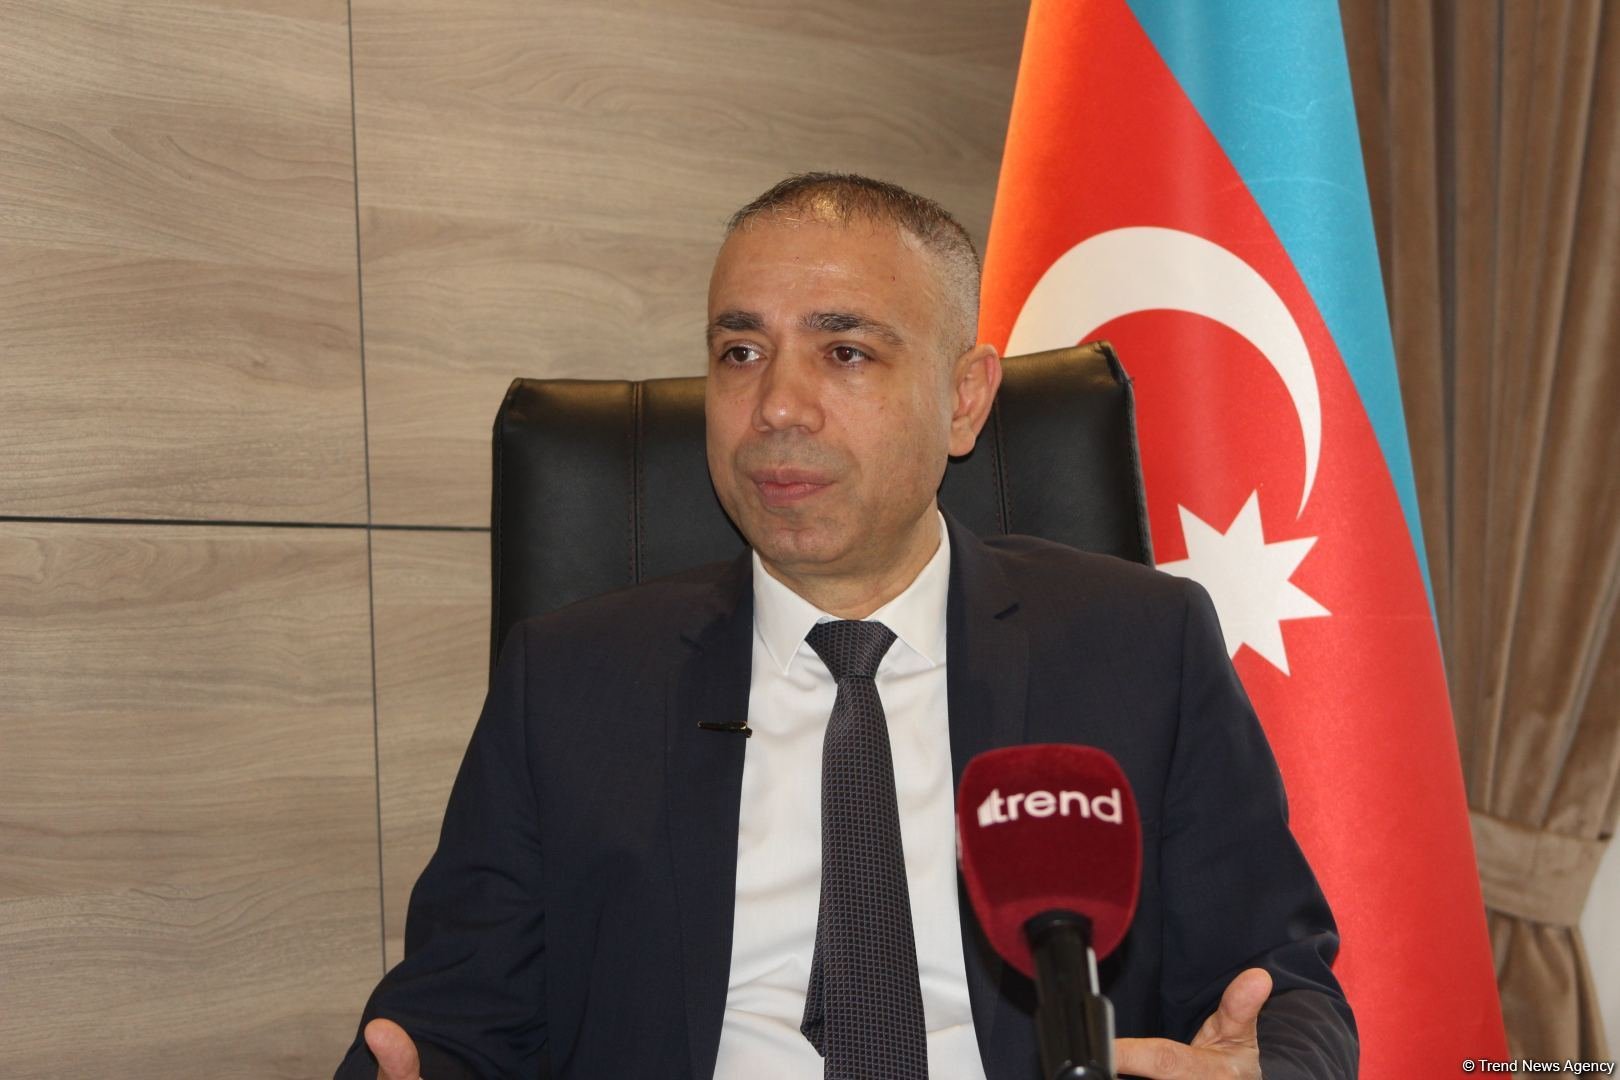 Germany dominating among Azerbaijan's trade and investment partners - deputy minister